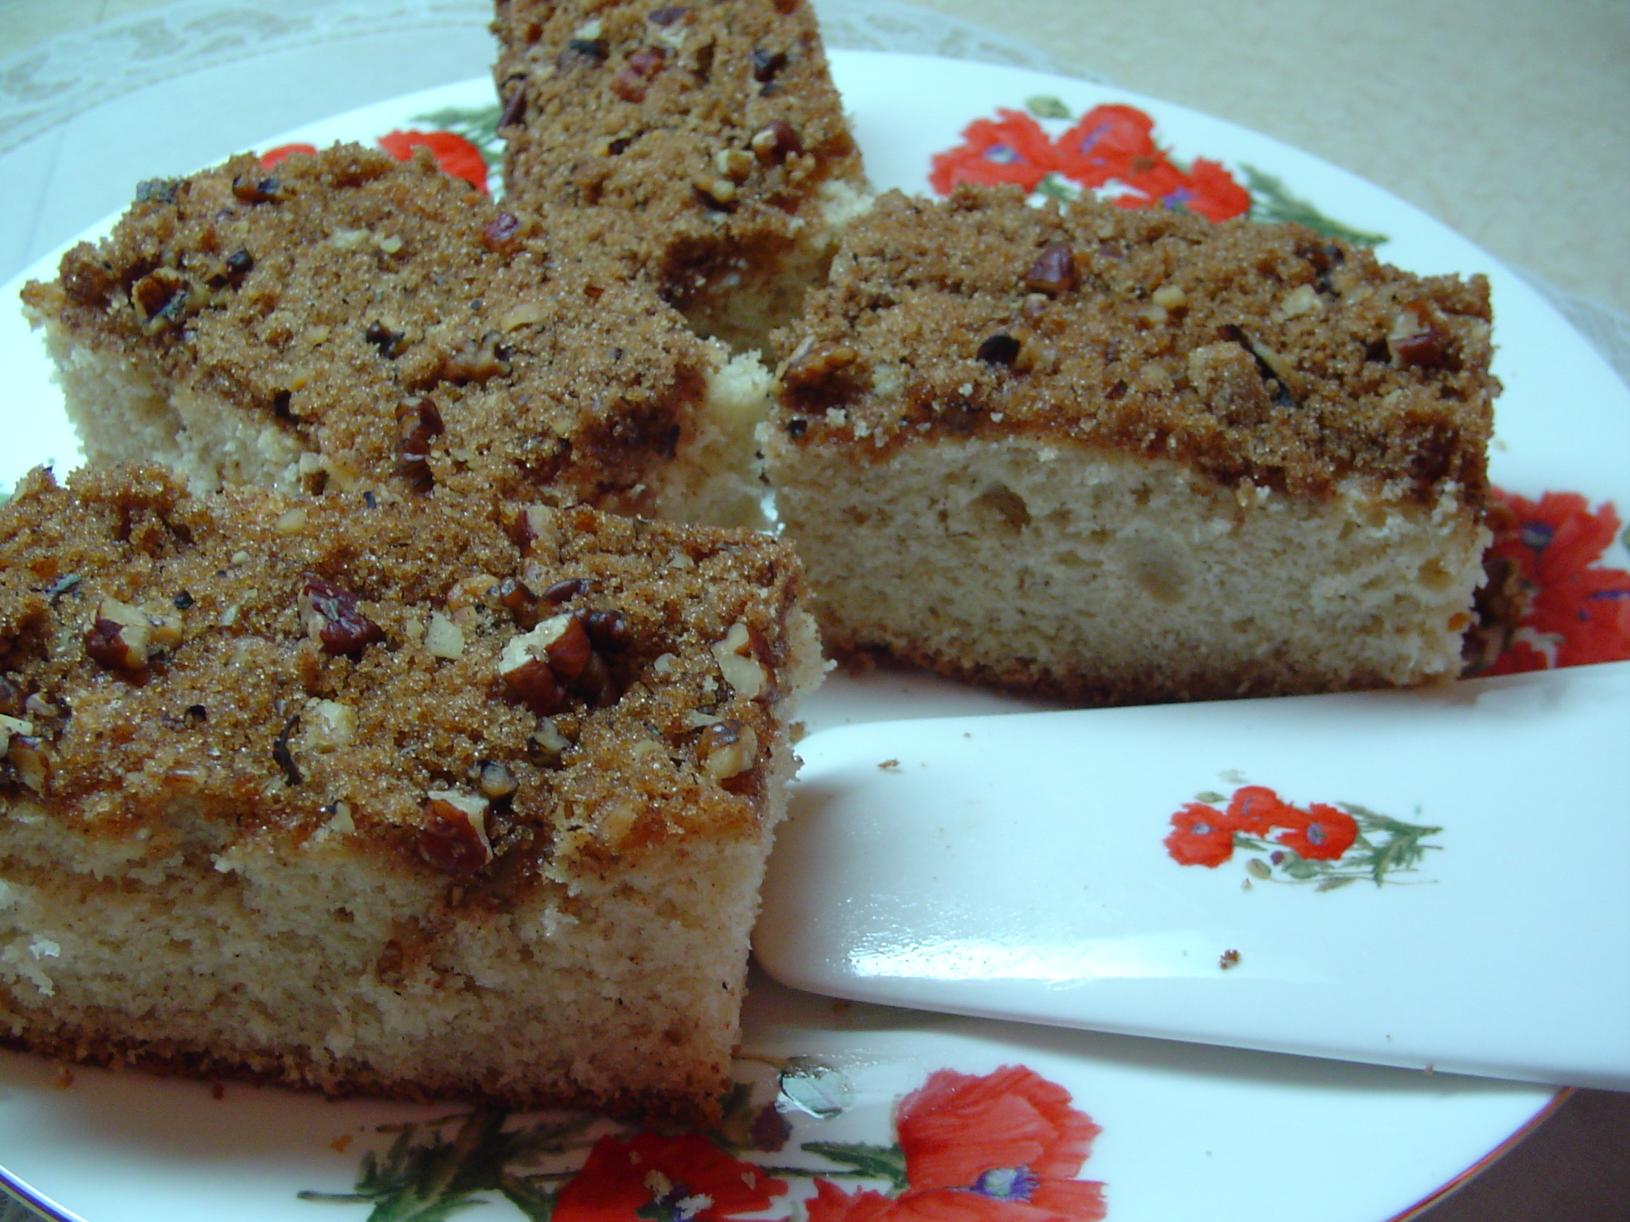  Wake up to a warm and delicious Overnight Coffee Cake!